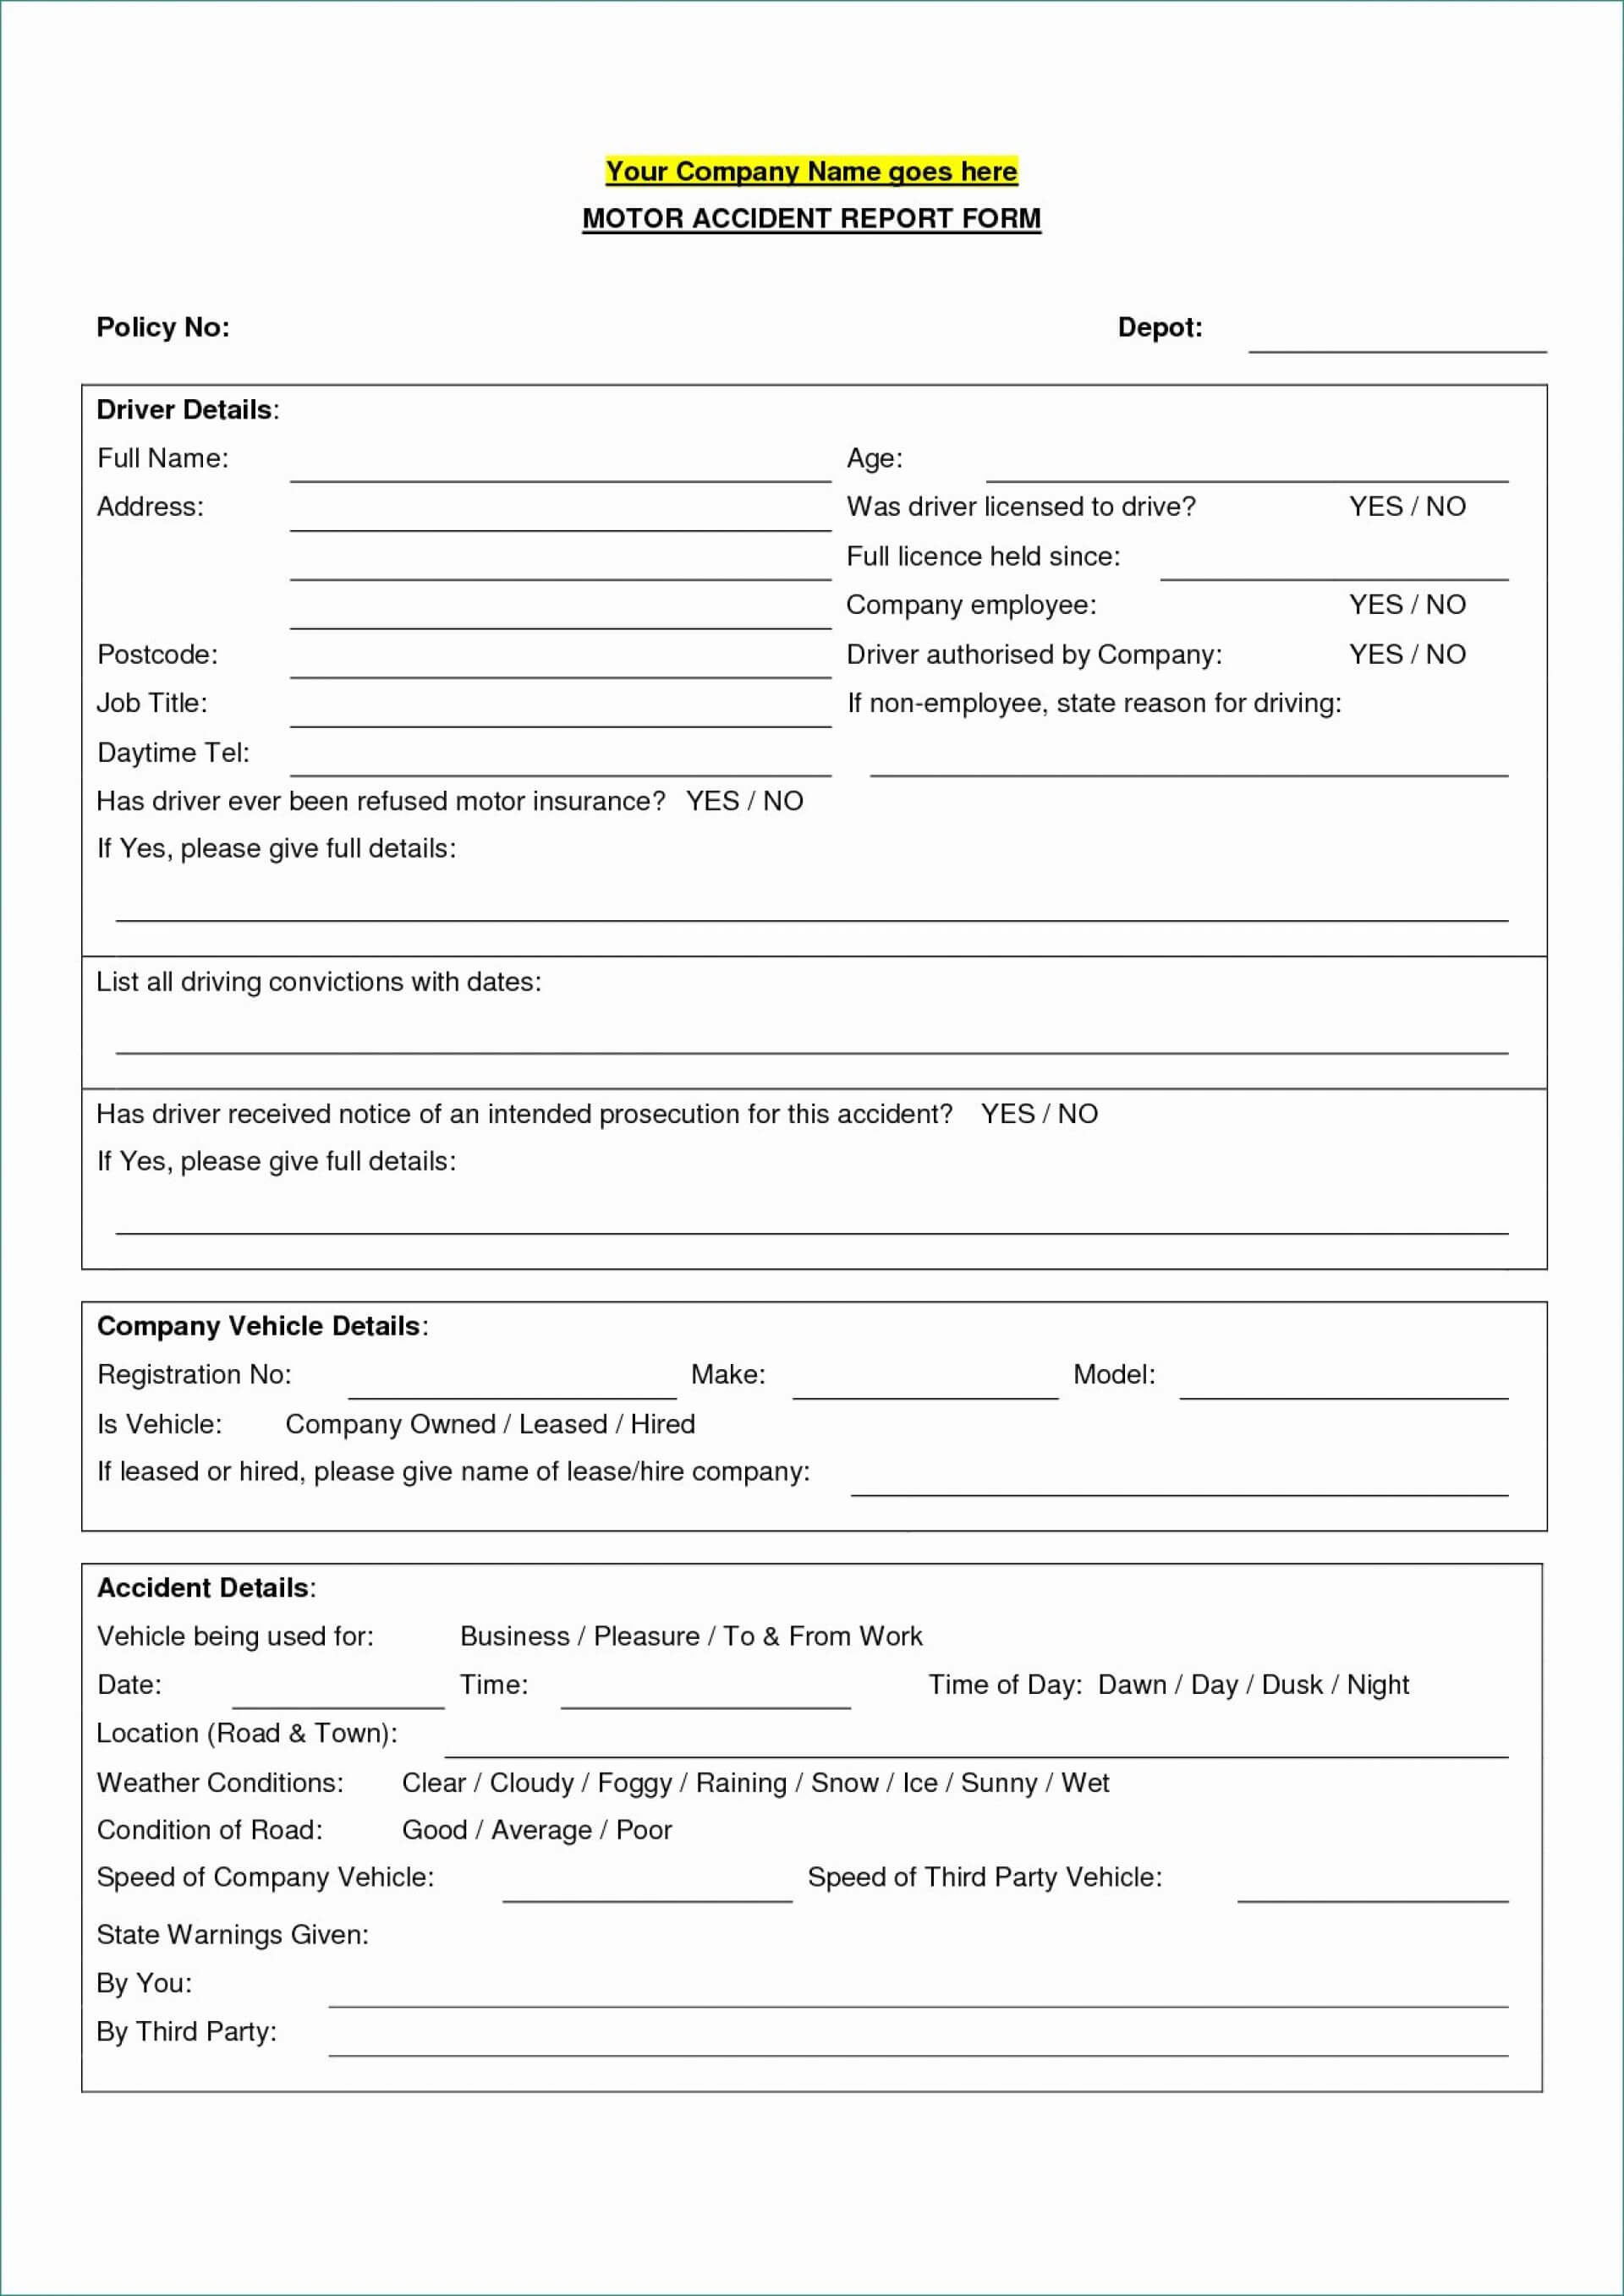 025 Vehicle Accident Report Form Template Ideas Sensational Inside Motor Vehicle Accident Report Form Template